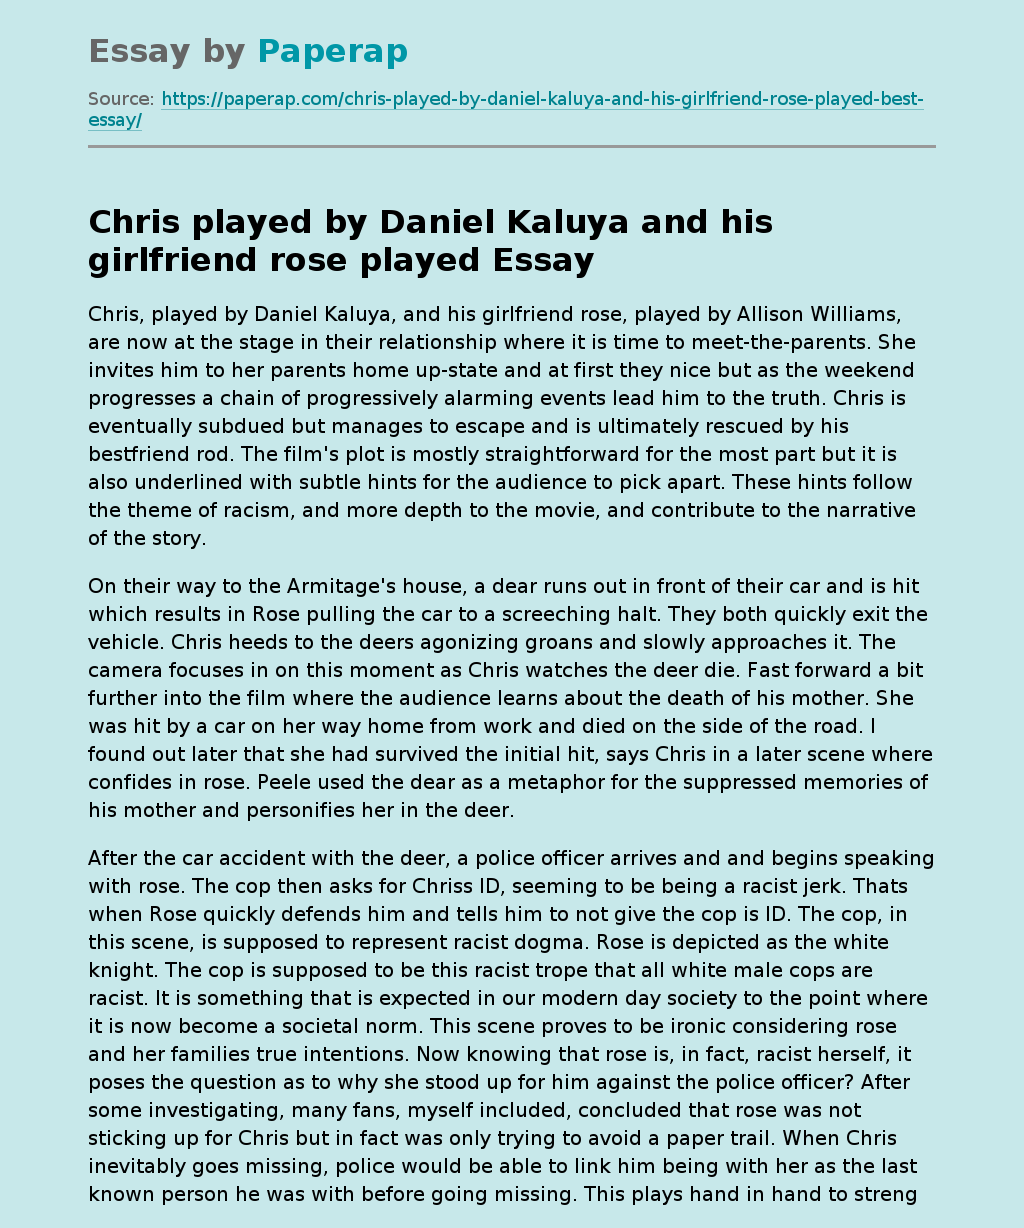 Chris played by Daniel Kaluya and his girlfriend rose played